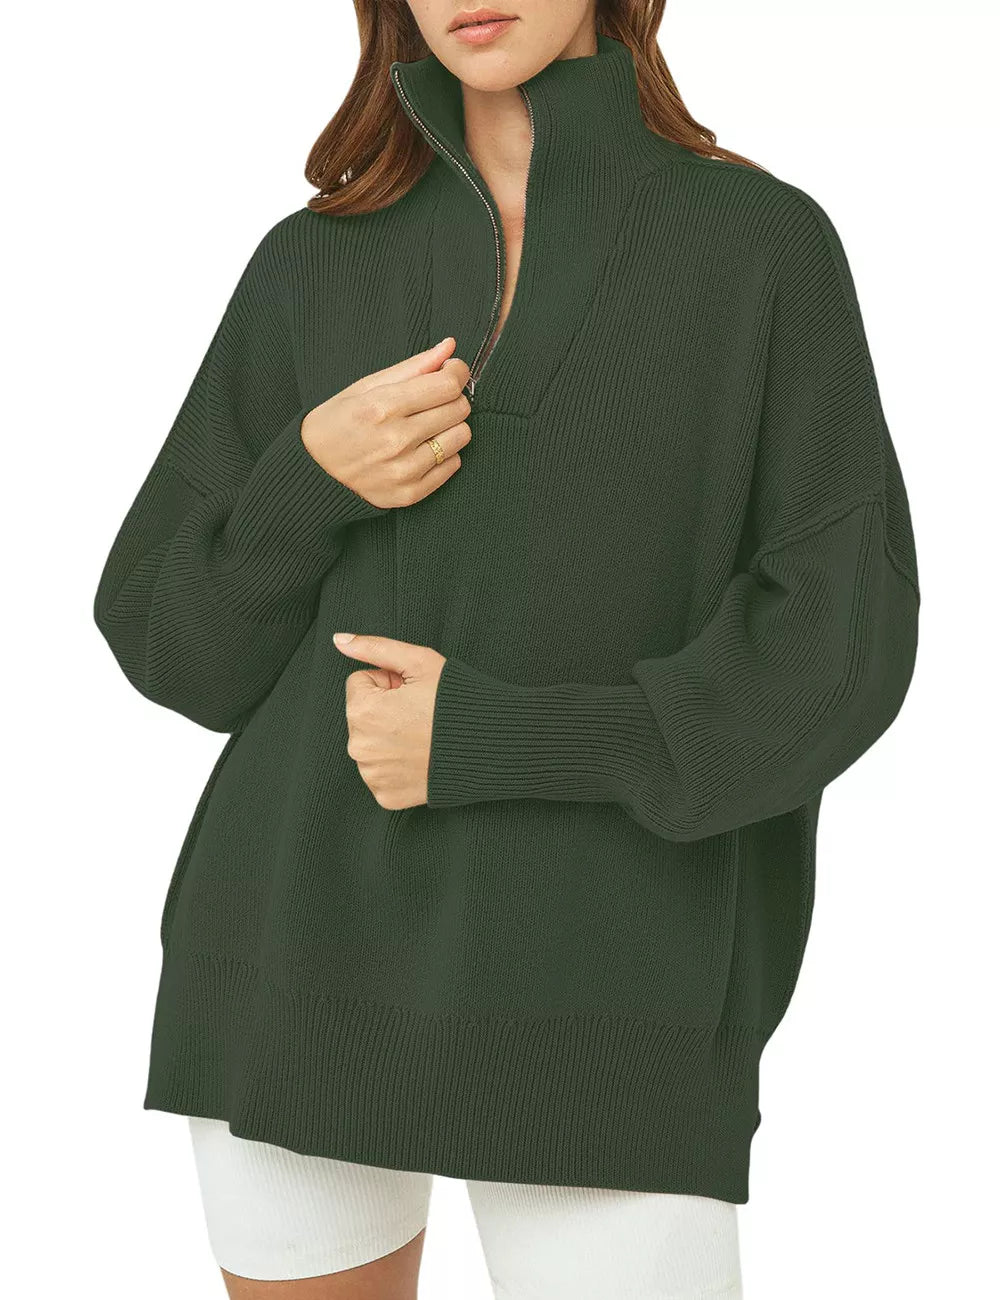 Buy Women's High Neck Army Green Sweater Online